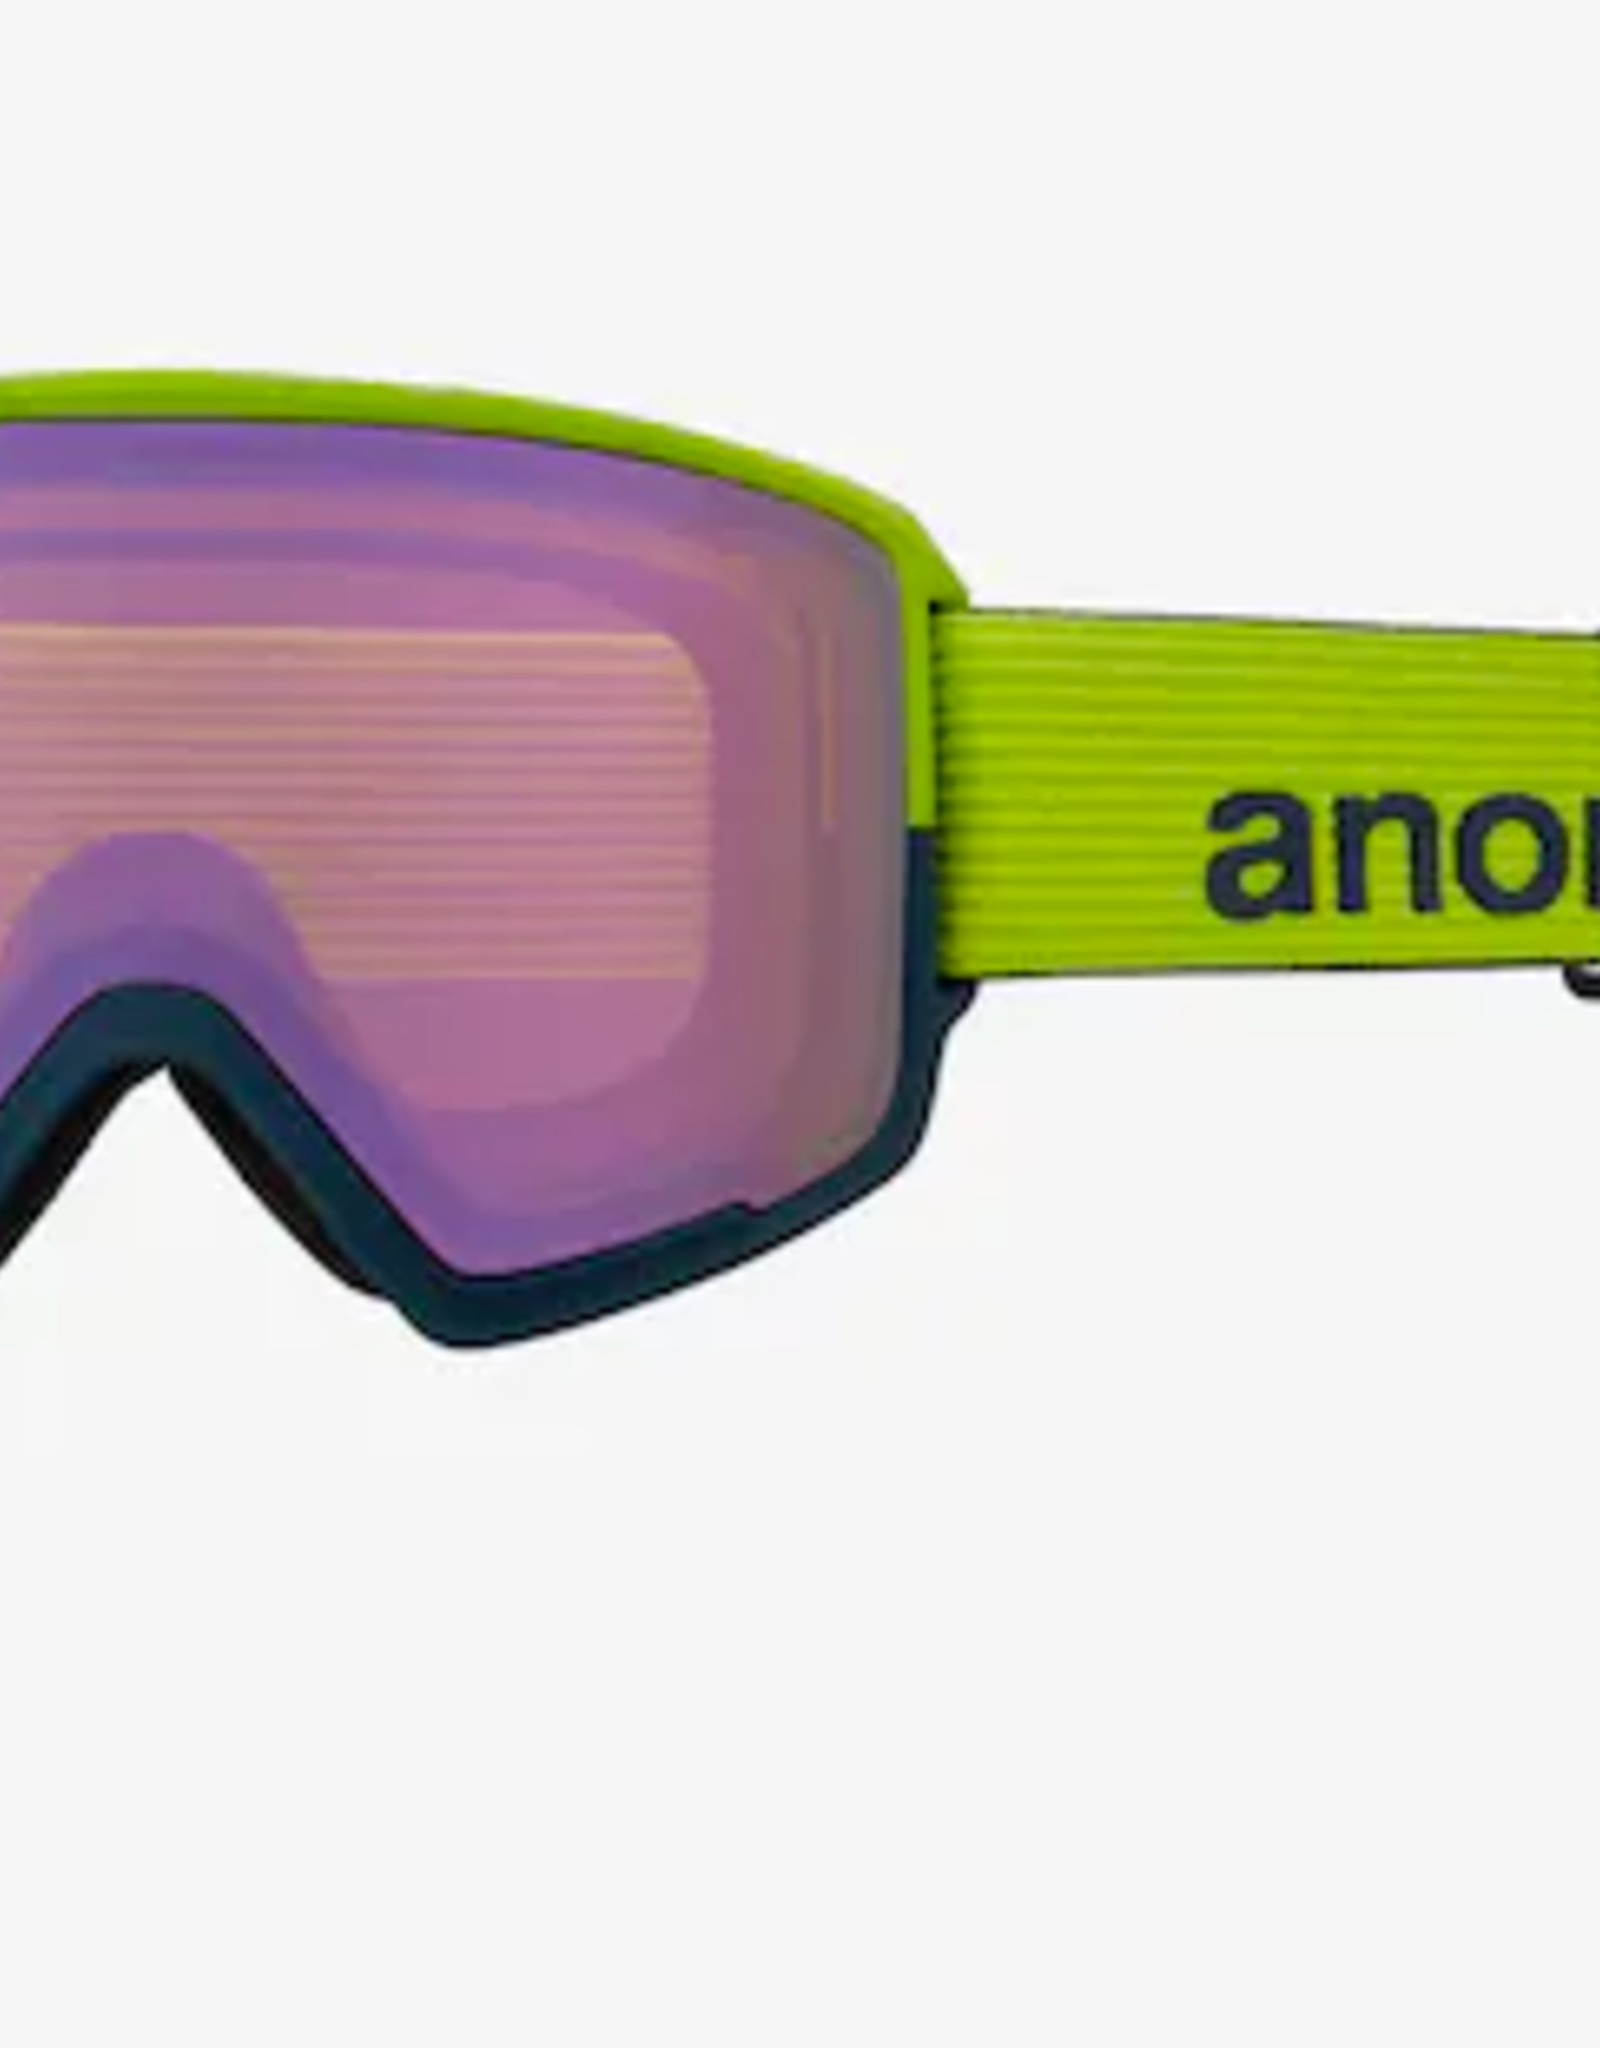 Anon M3 Asian Fit Black Goggles+Perceive Variable Green+Perceive Cloudy Pink 2022